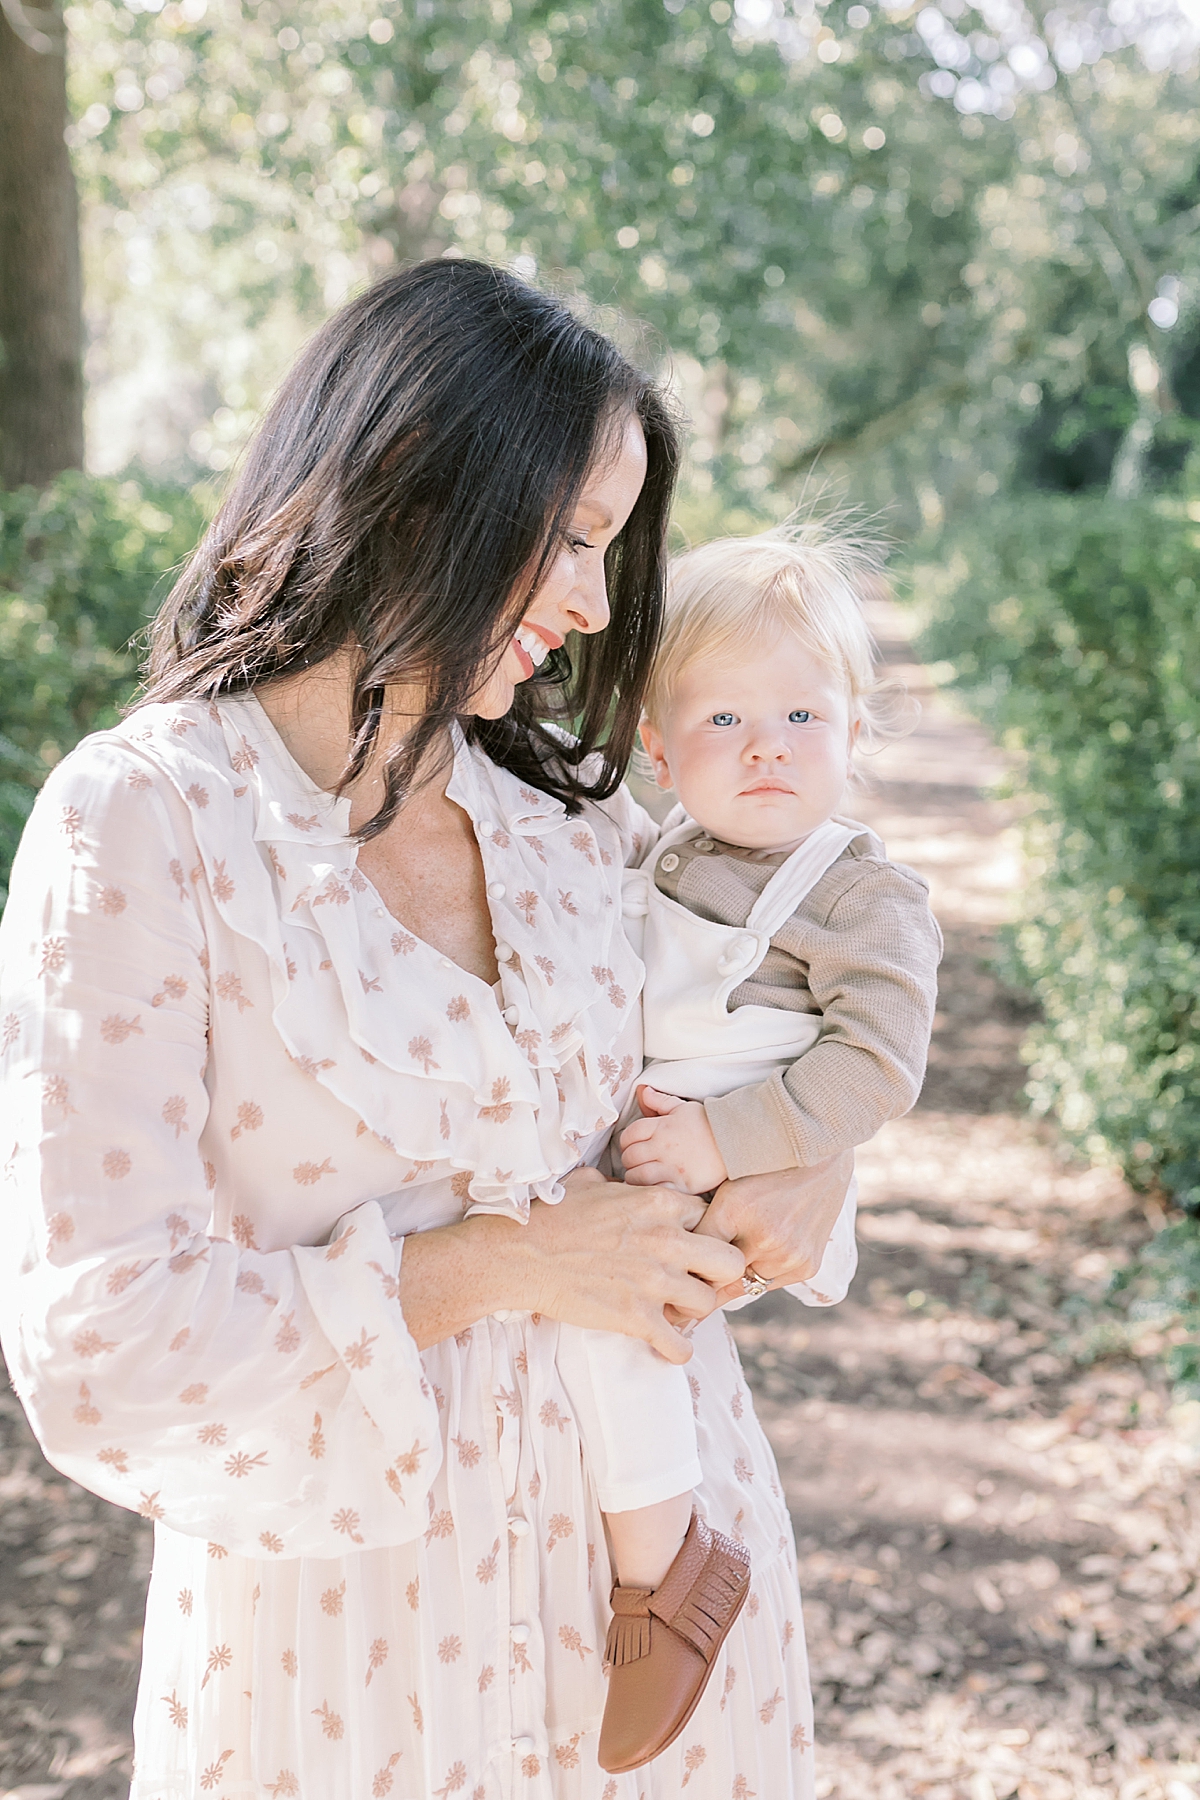 Fall photoshoot with Mama and baby boy. Photos by Caitlyn Motycka Photography.